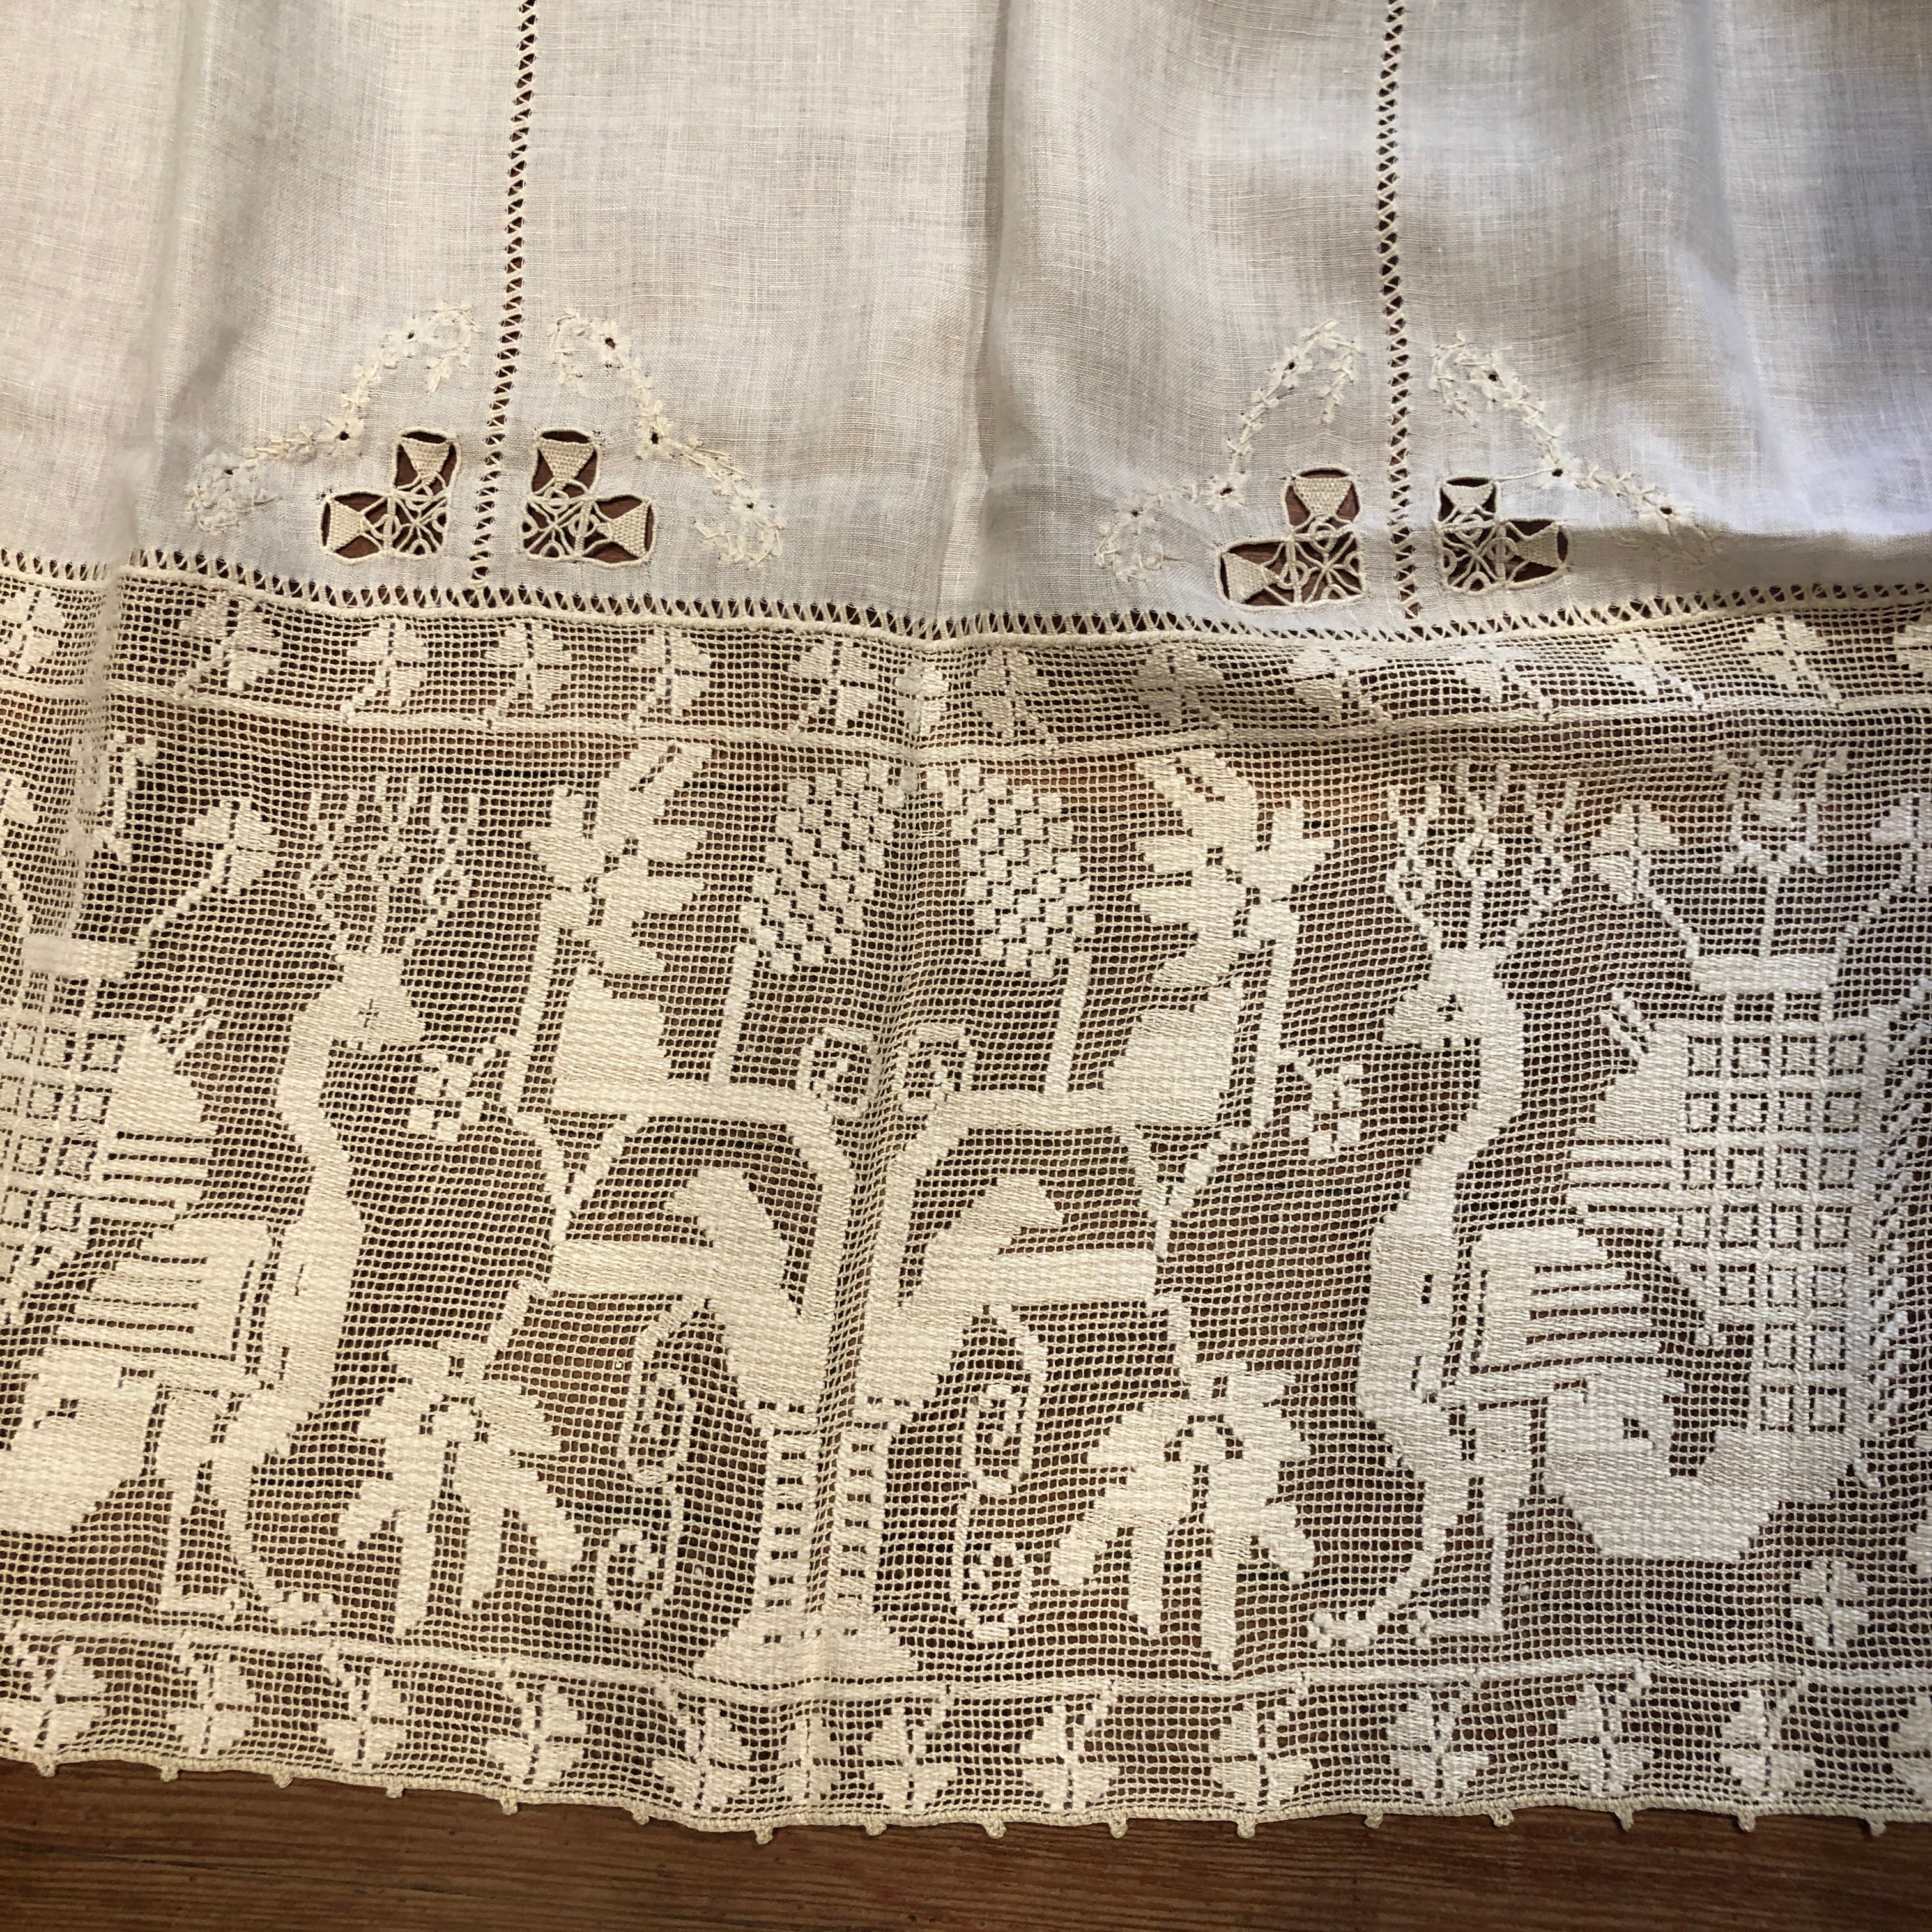 Antique Lace and Linen Cloth with Peacocks